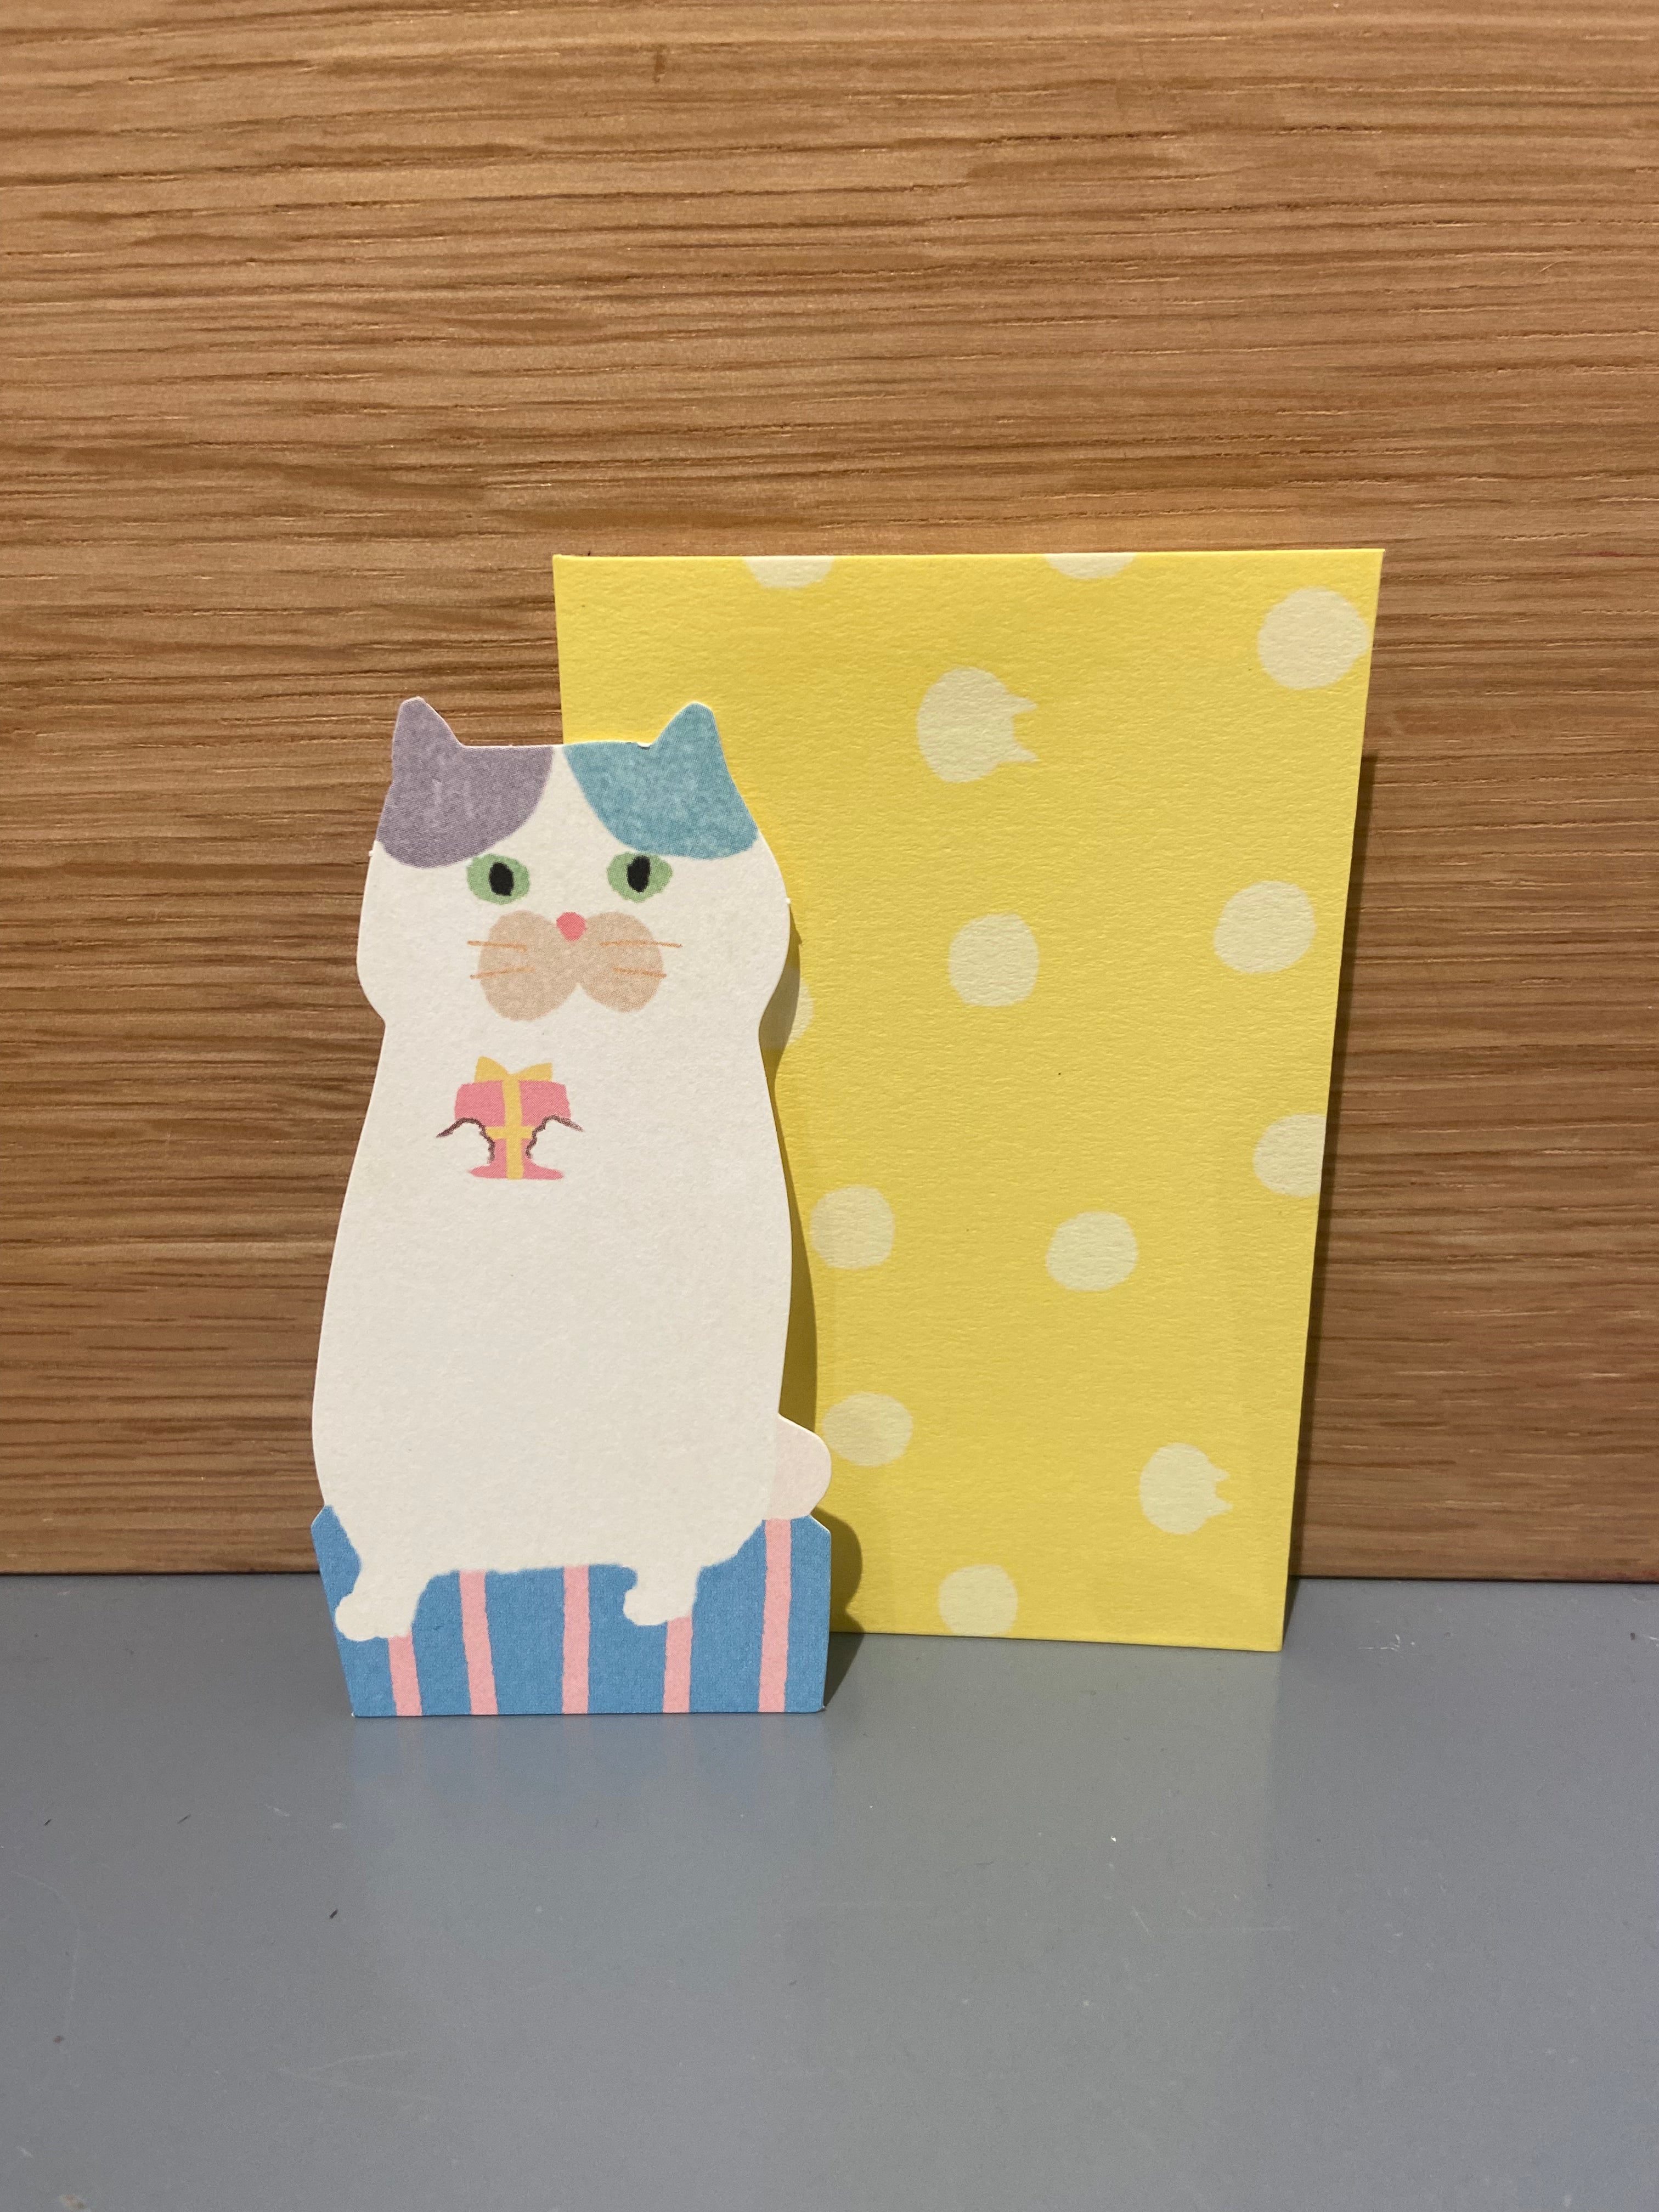 Set of 5 small cards + yellow envelopes, white cat